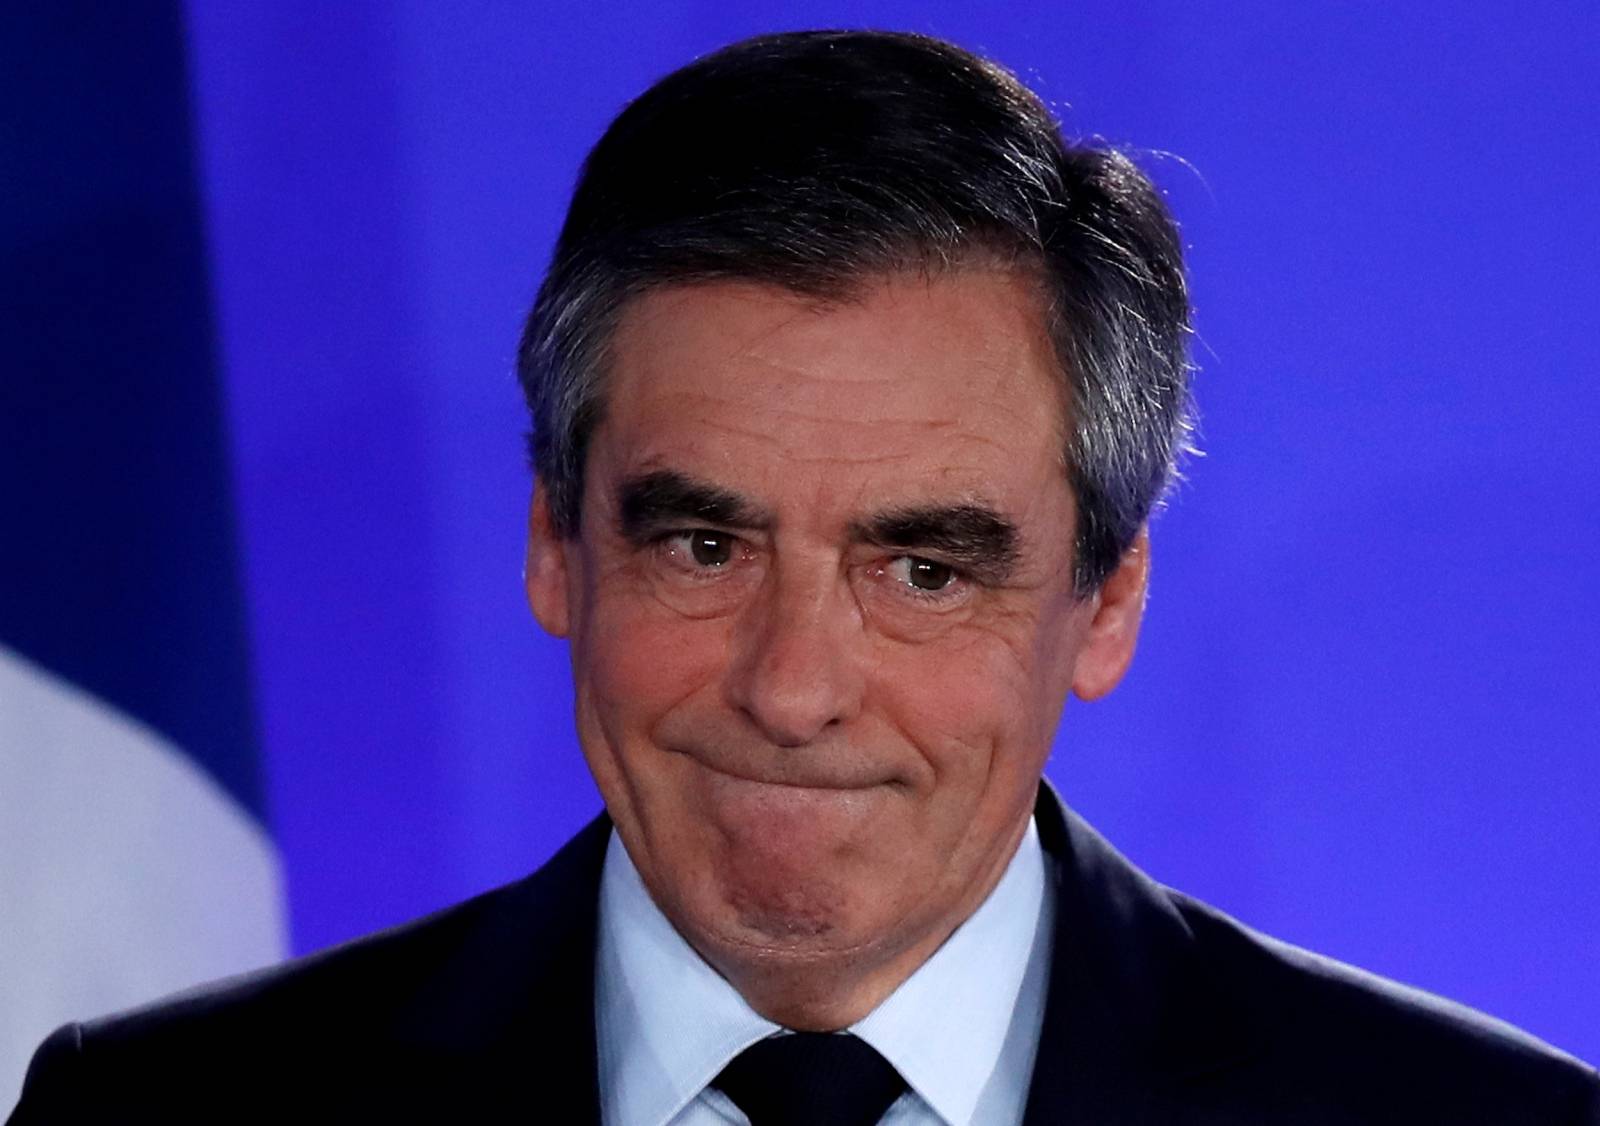 FILE PHOTO: Francois Fillon, member of the Republicans political party and 2017 French presidential election candidate of the French centre-right, reacts as he delivers a speech at his campaign headquarters in Paris